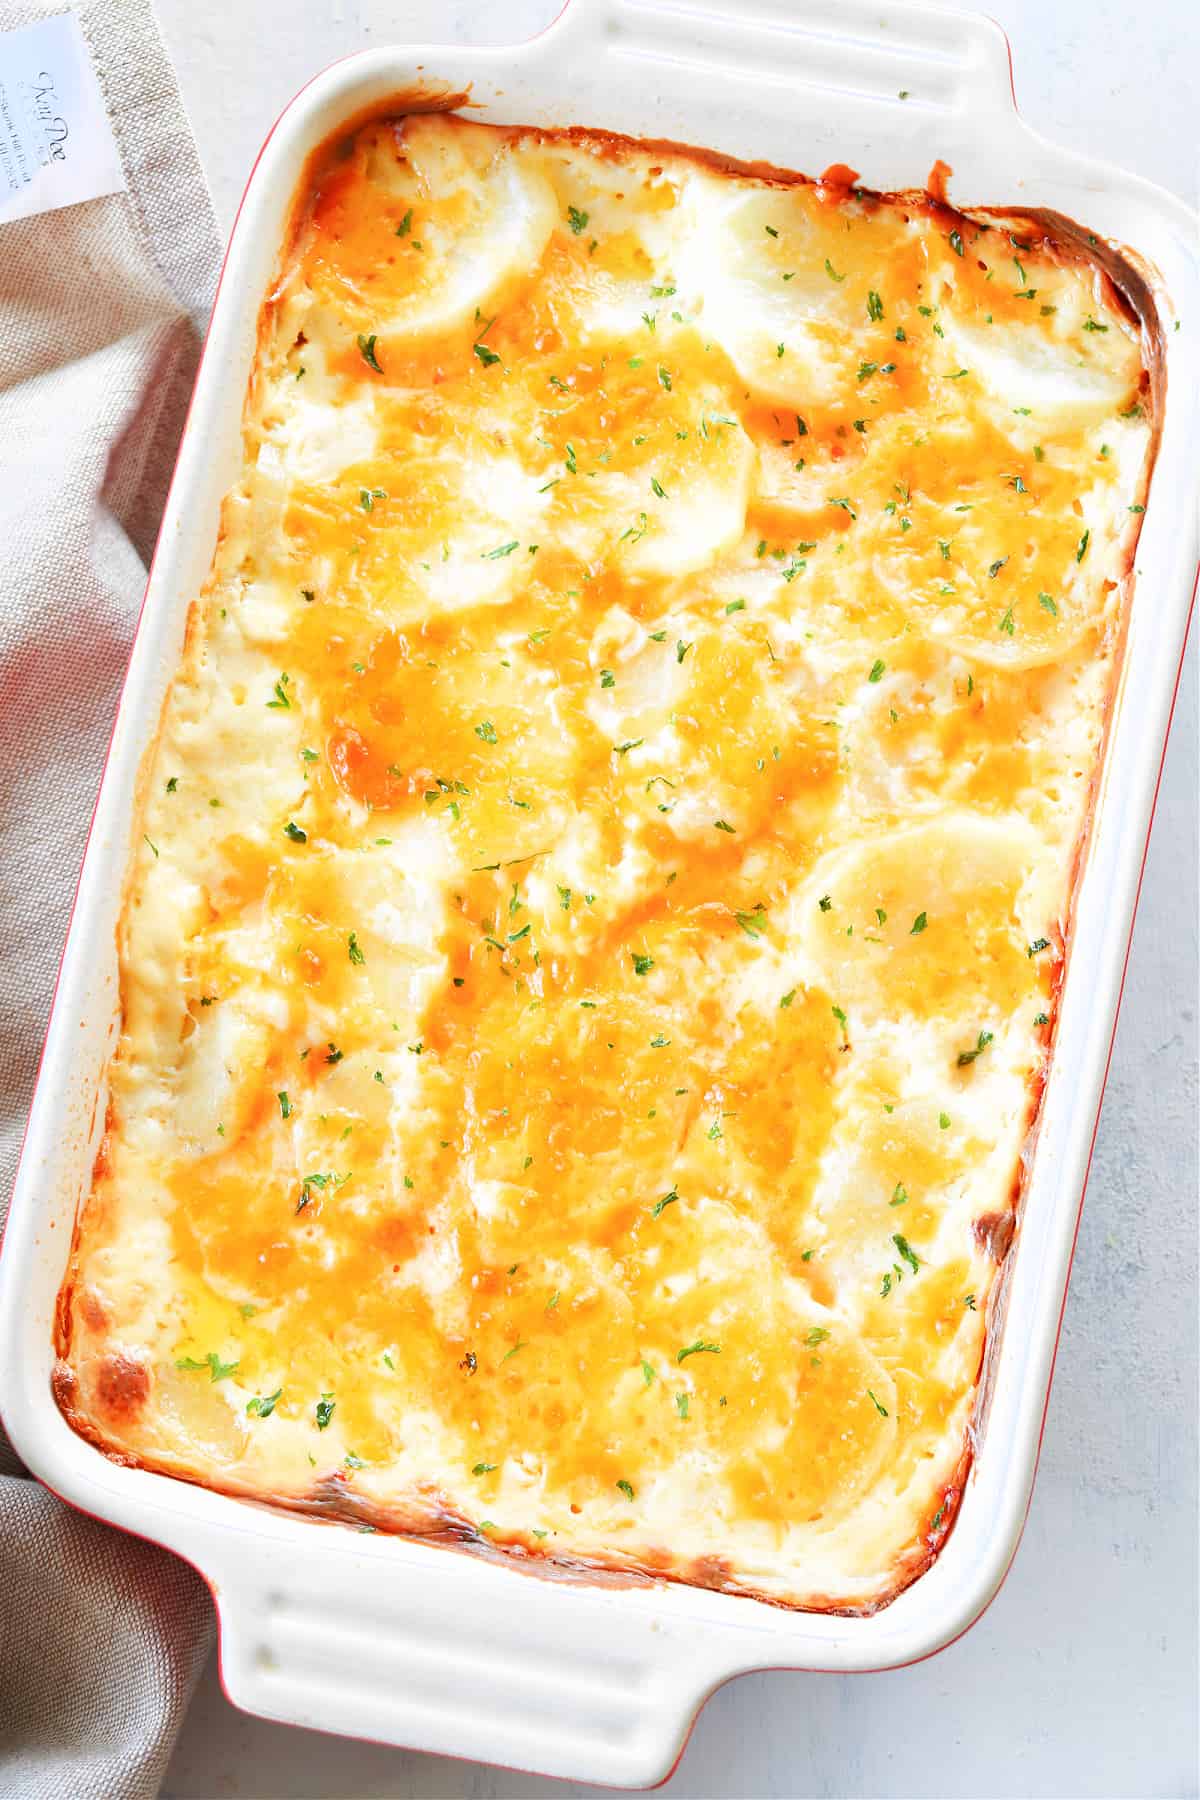 Scalloped potatoes in a baking dish.